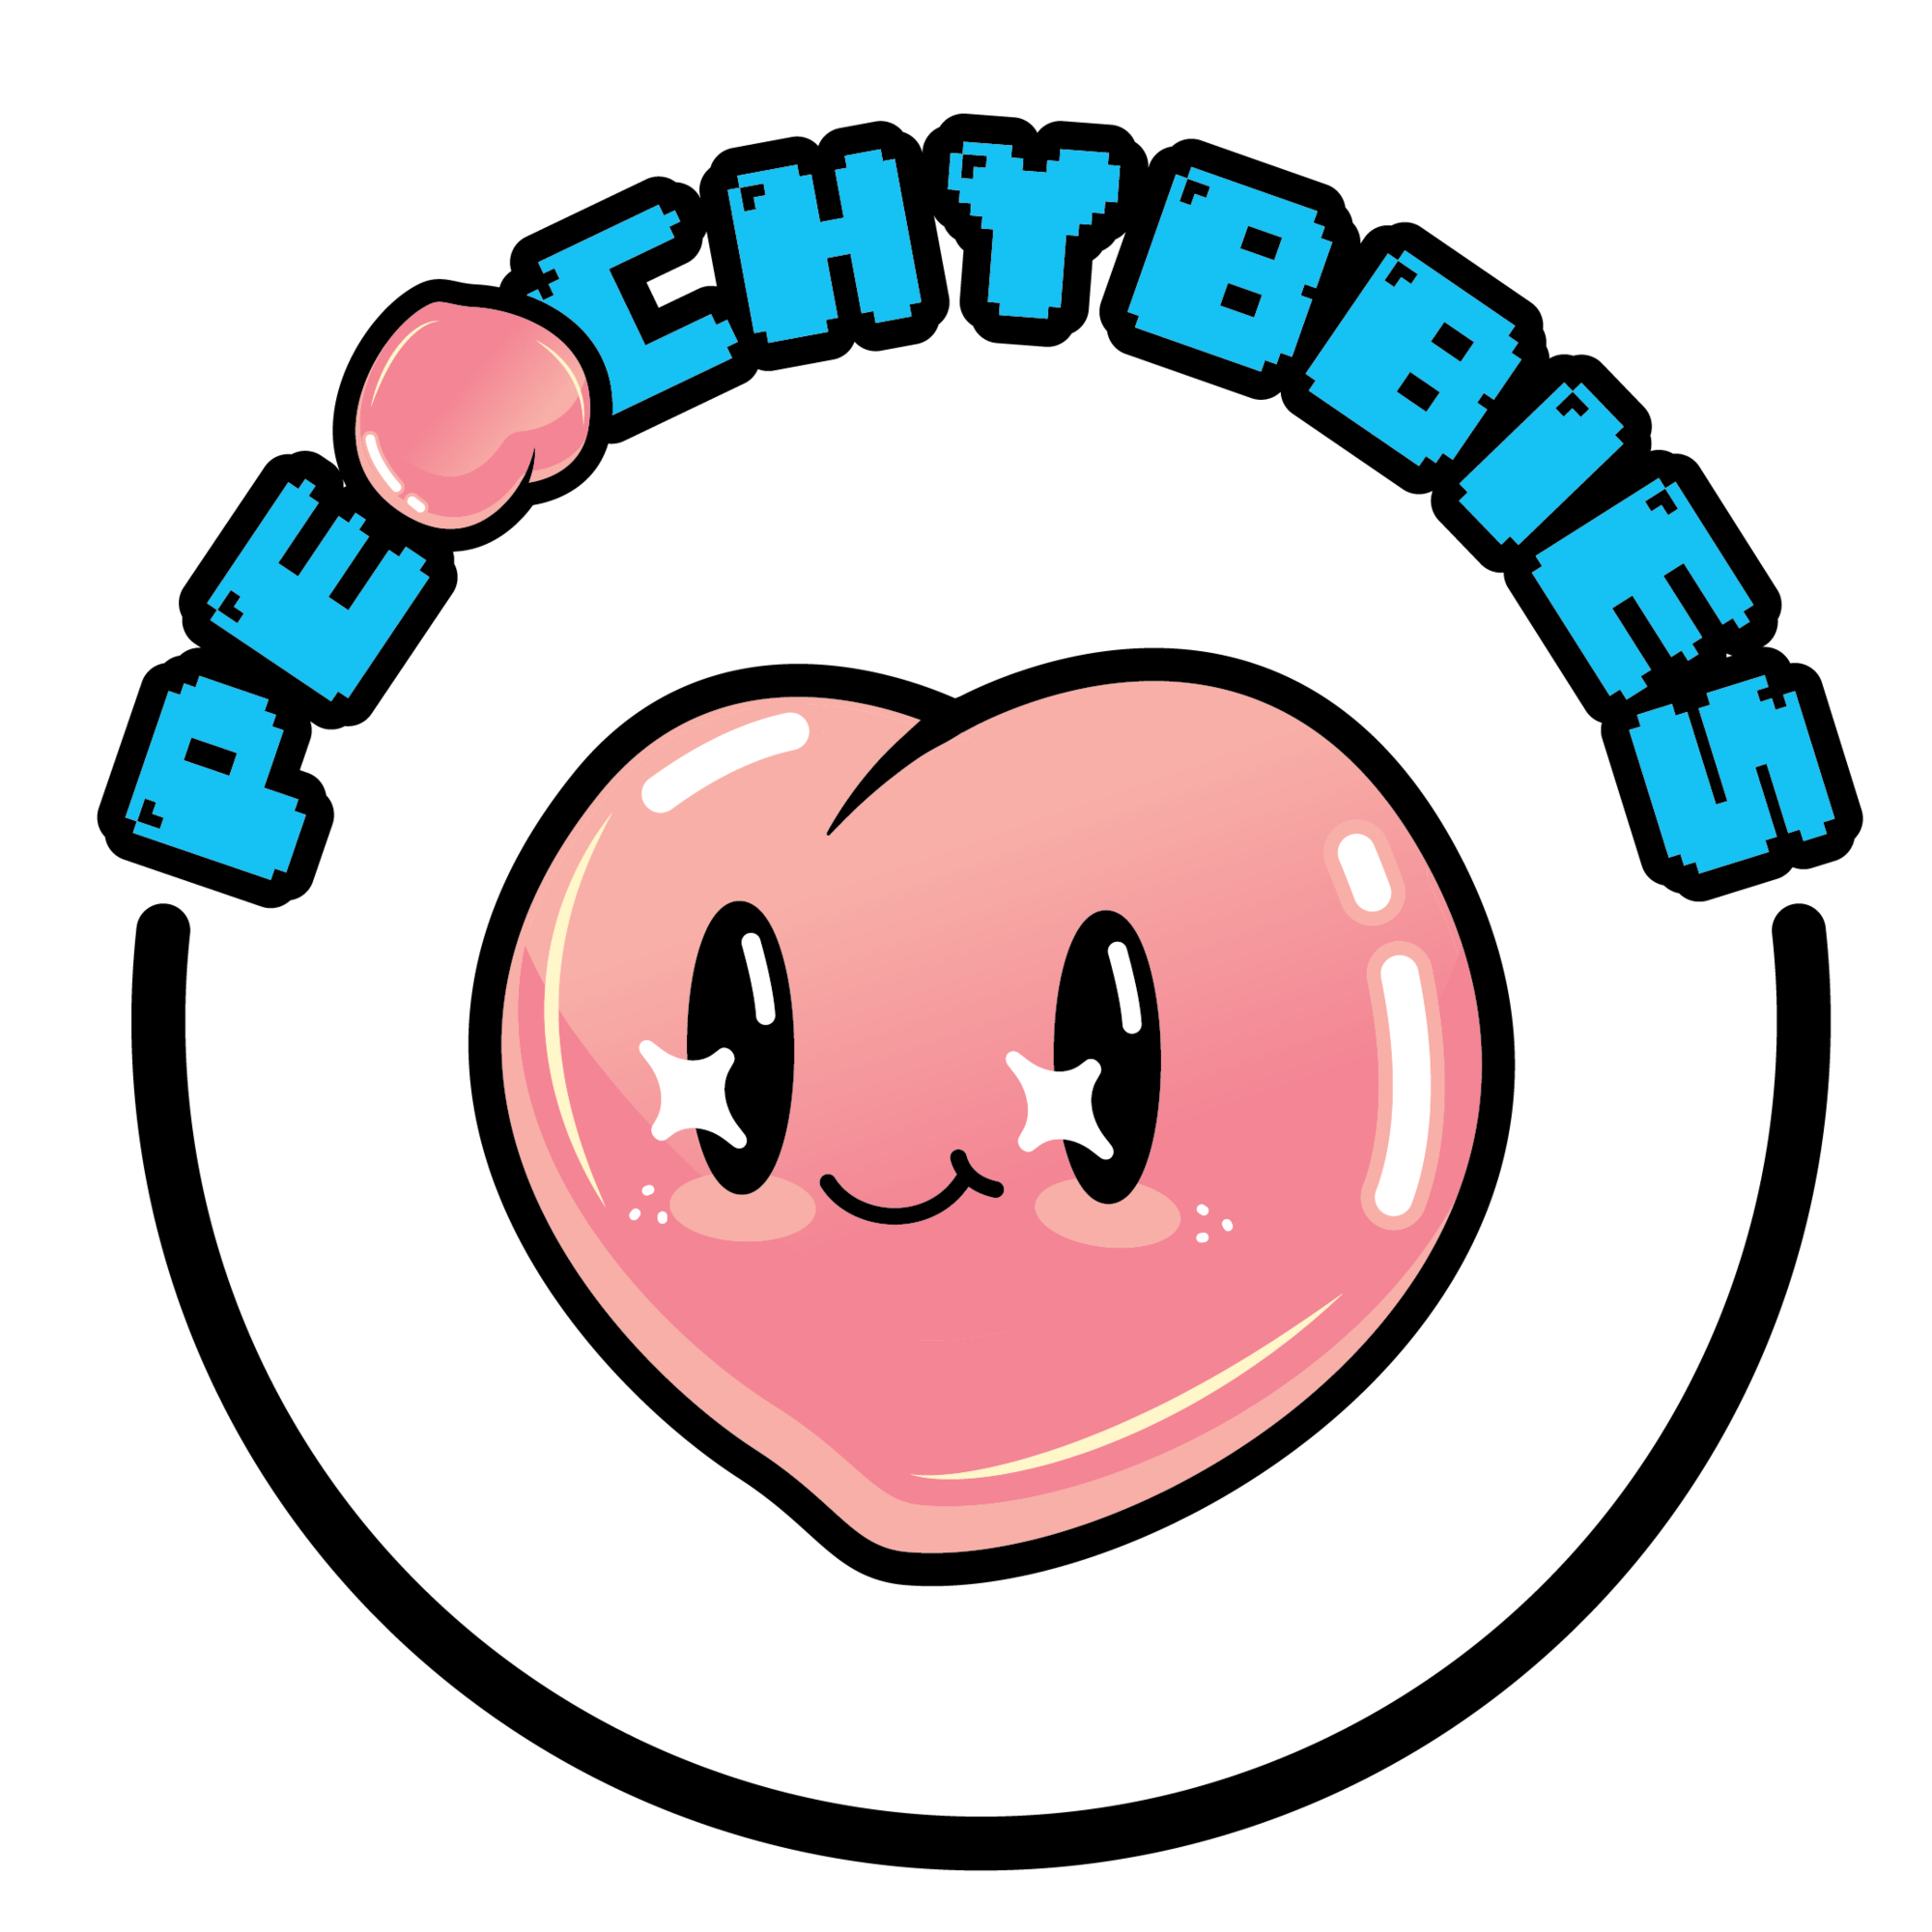 Peachybbies/Peachybabies Slime YOU PICK! New and Gently Used